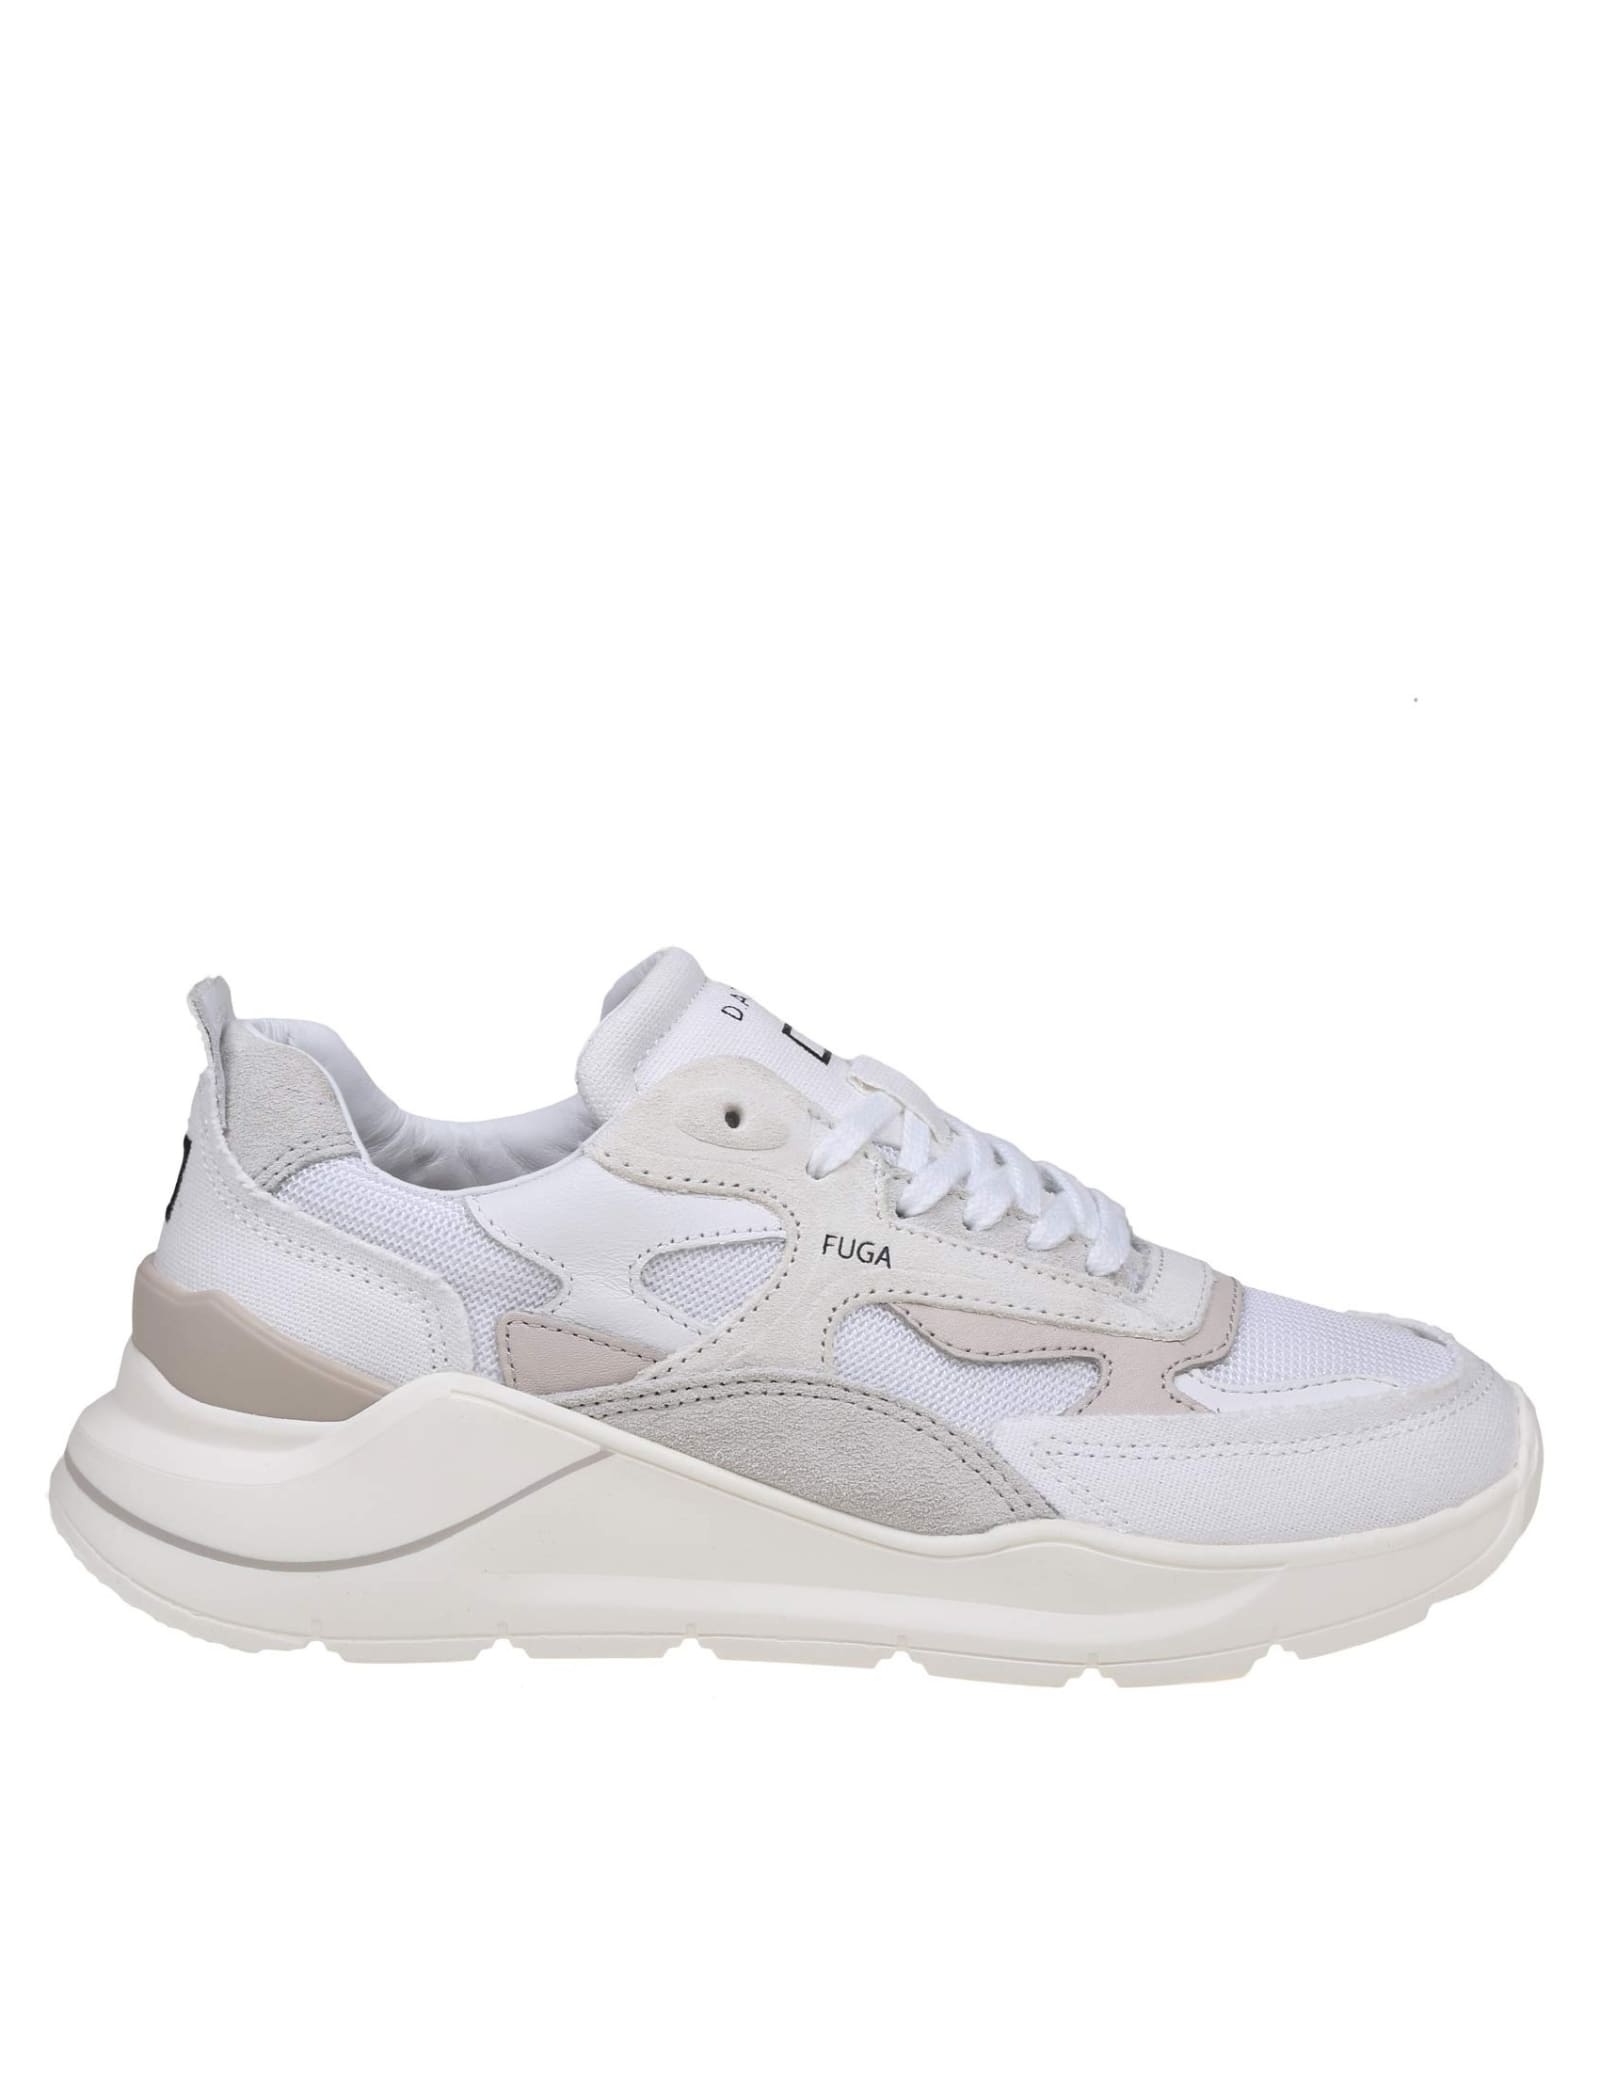 Fuga Sneakers In White Leather And Fabric